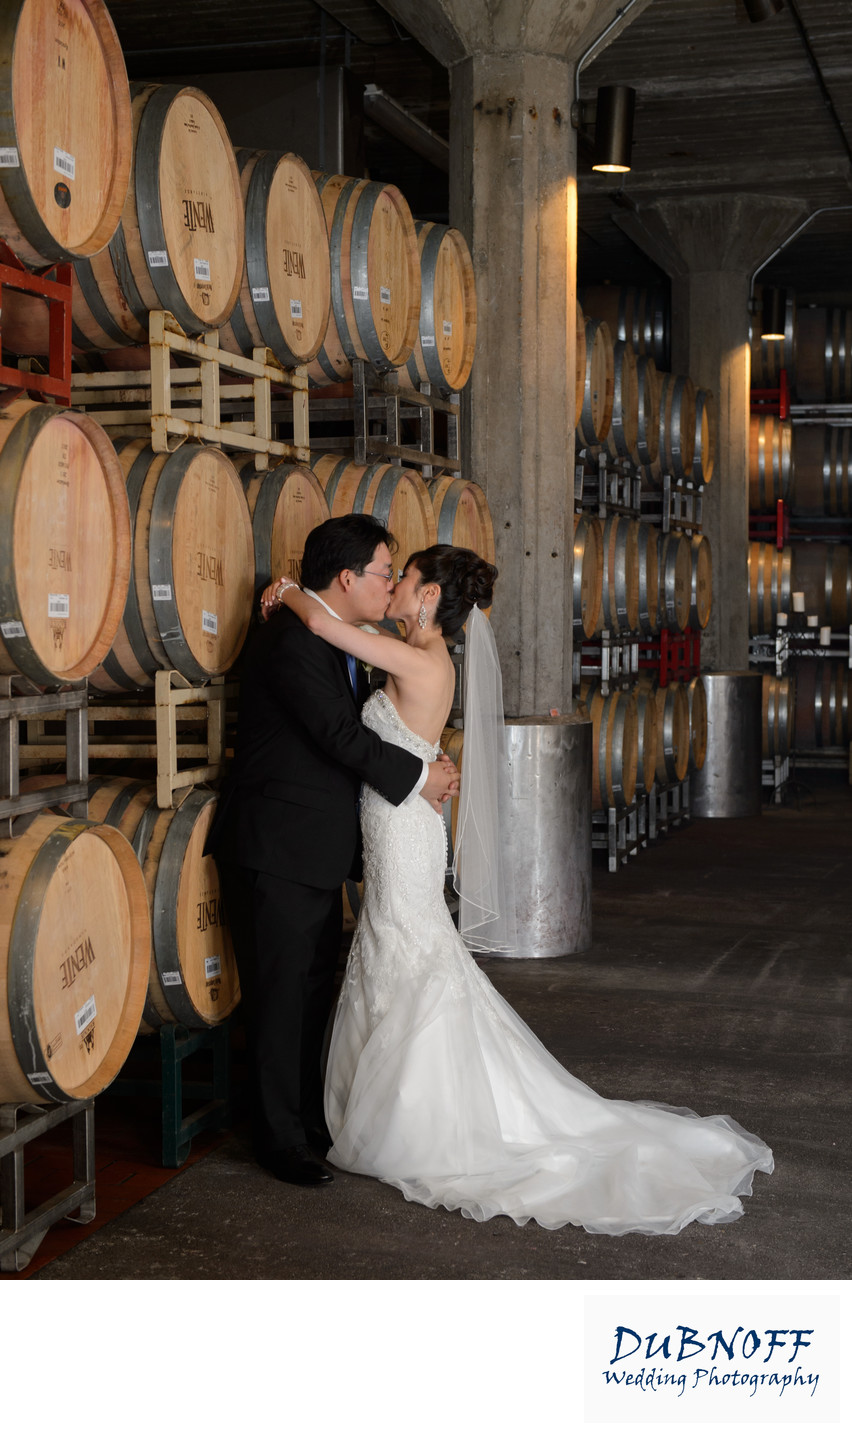 Wedding Photography in the Cellar Room at Wente Winery